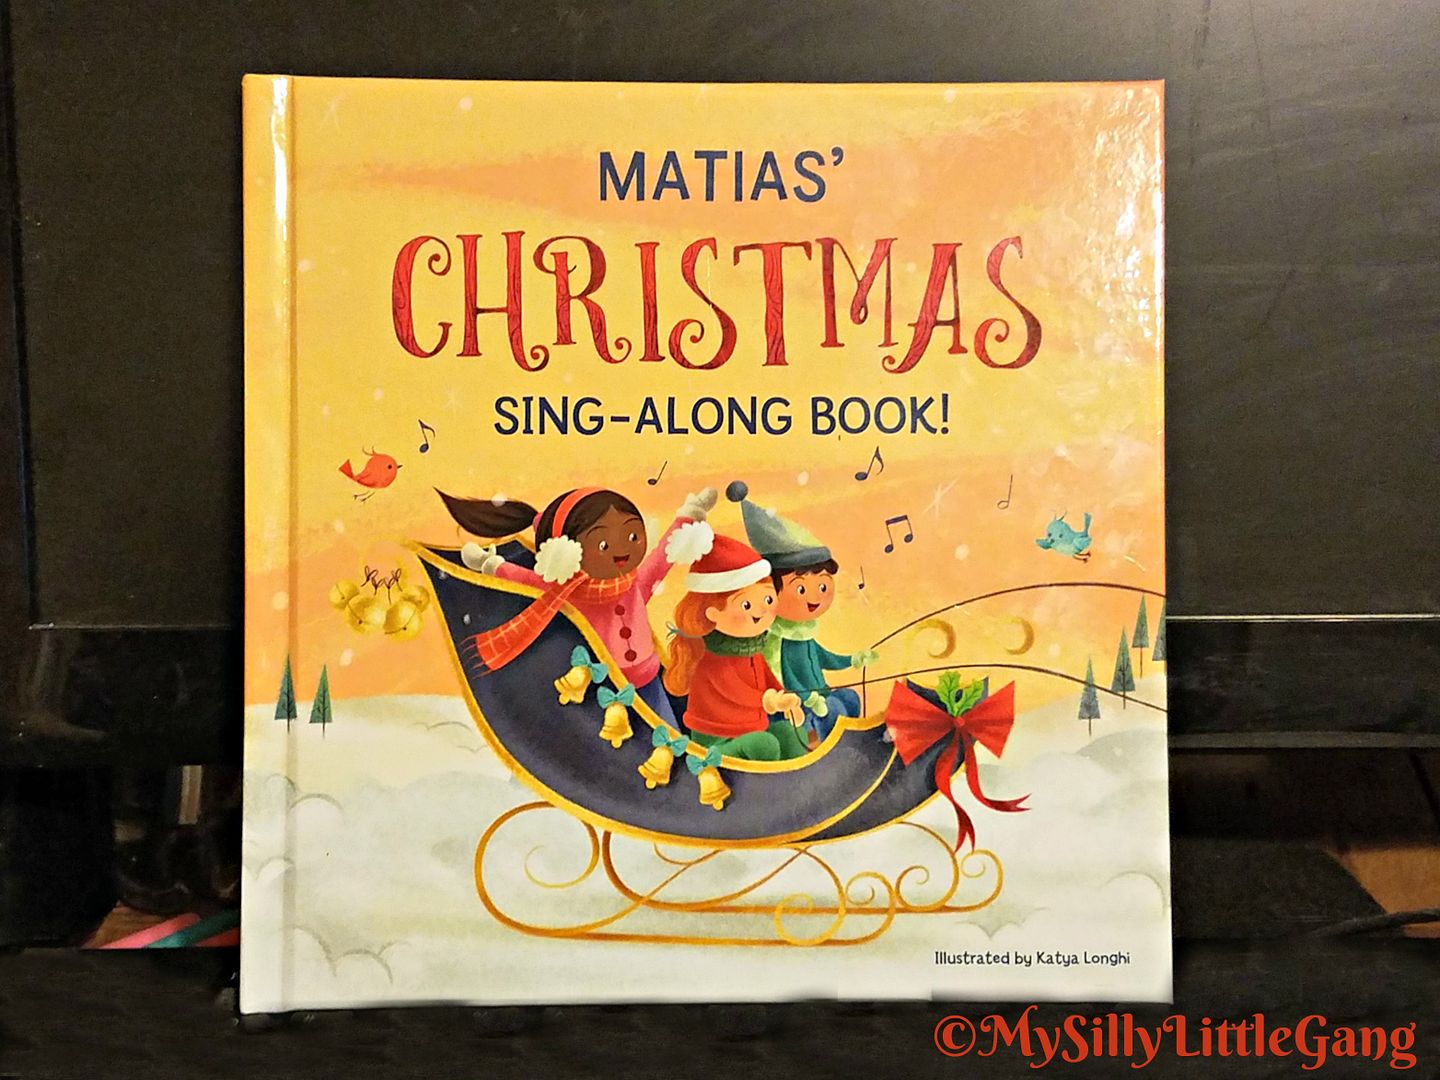 Christmas sing-along personalized book